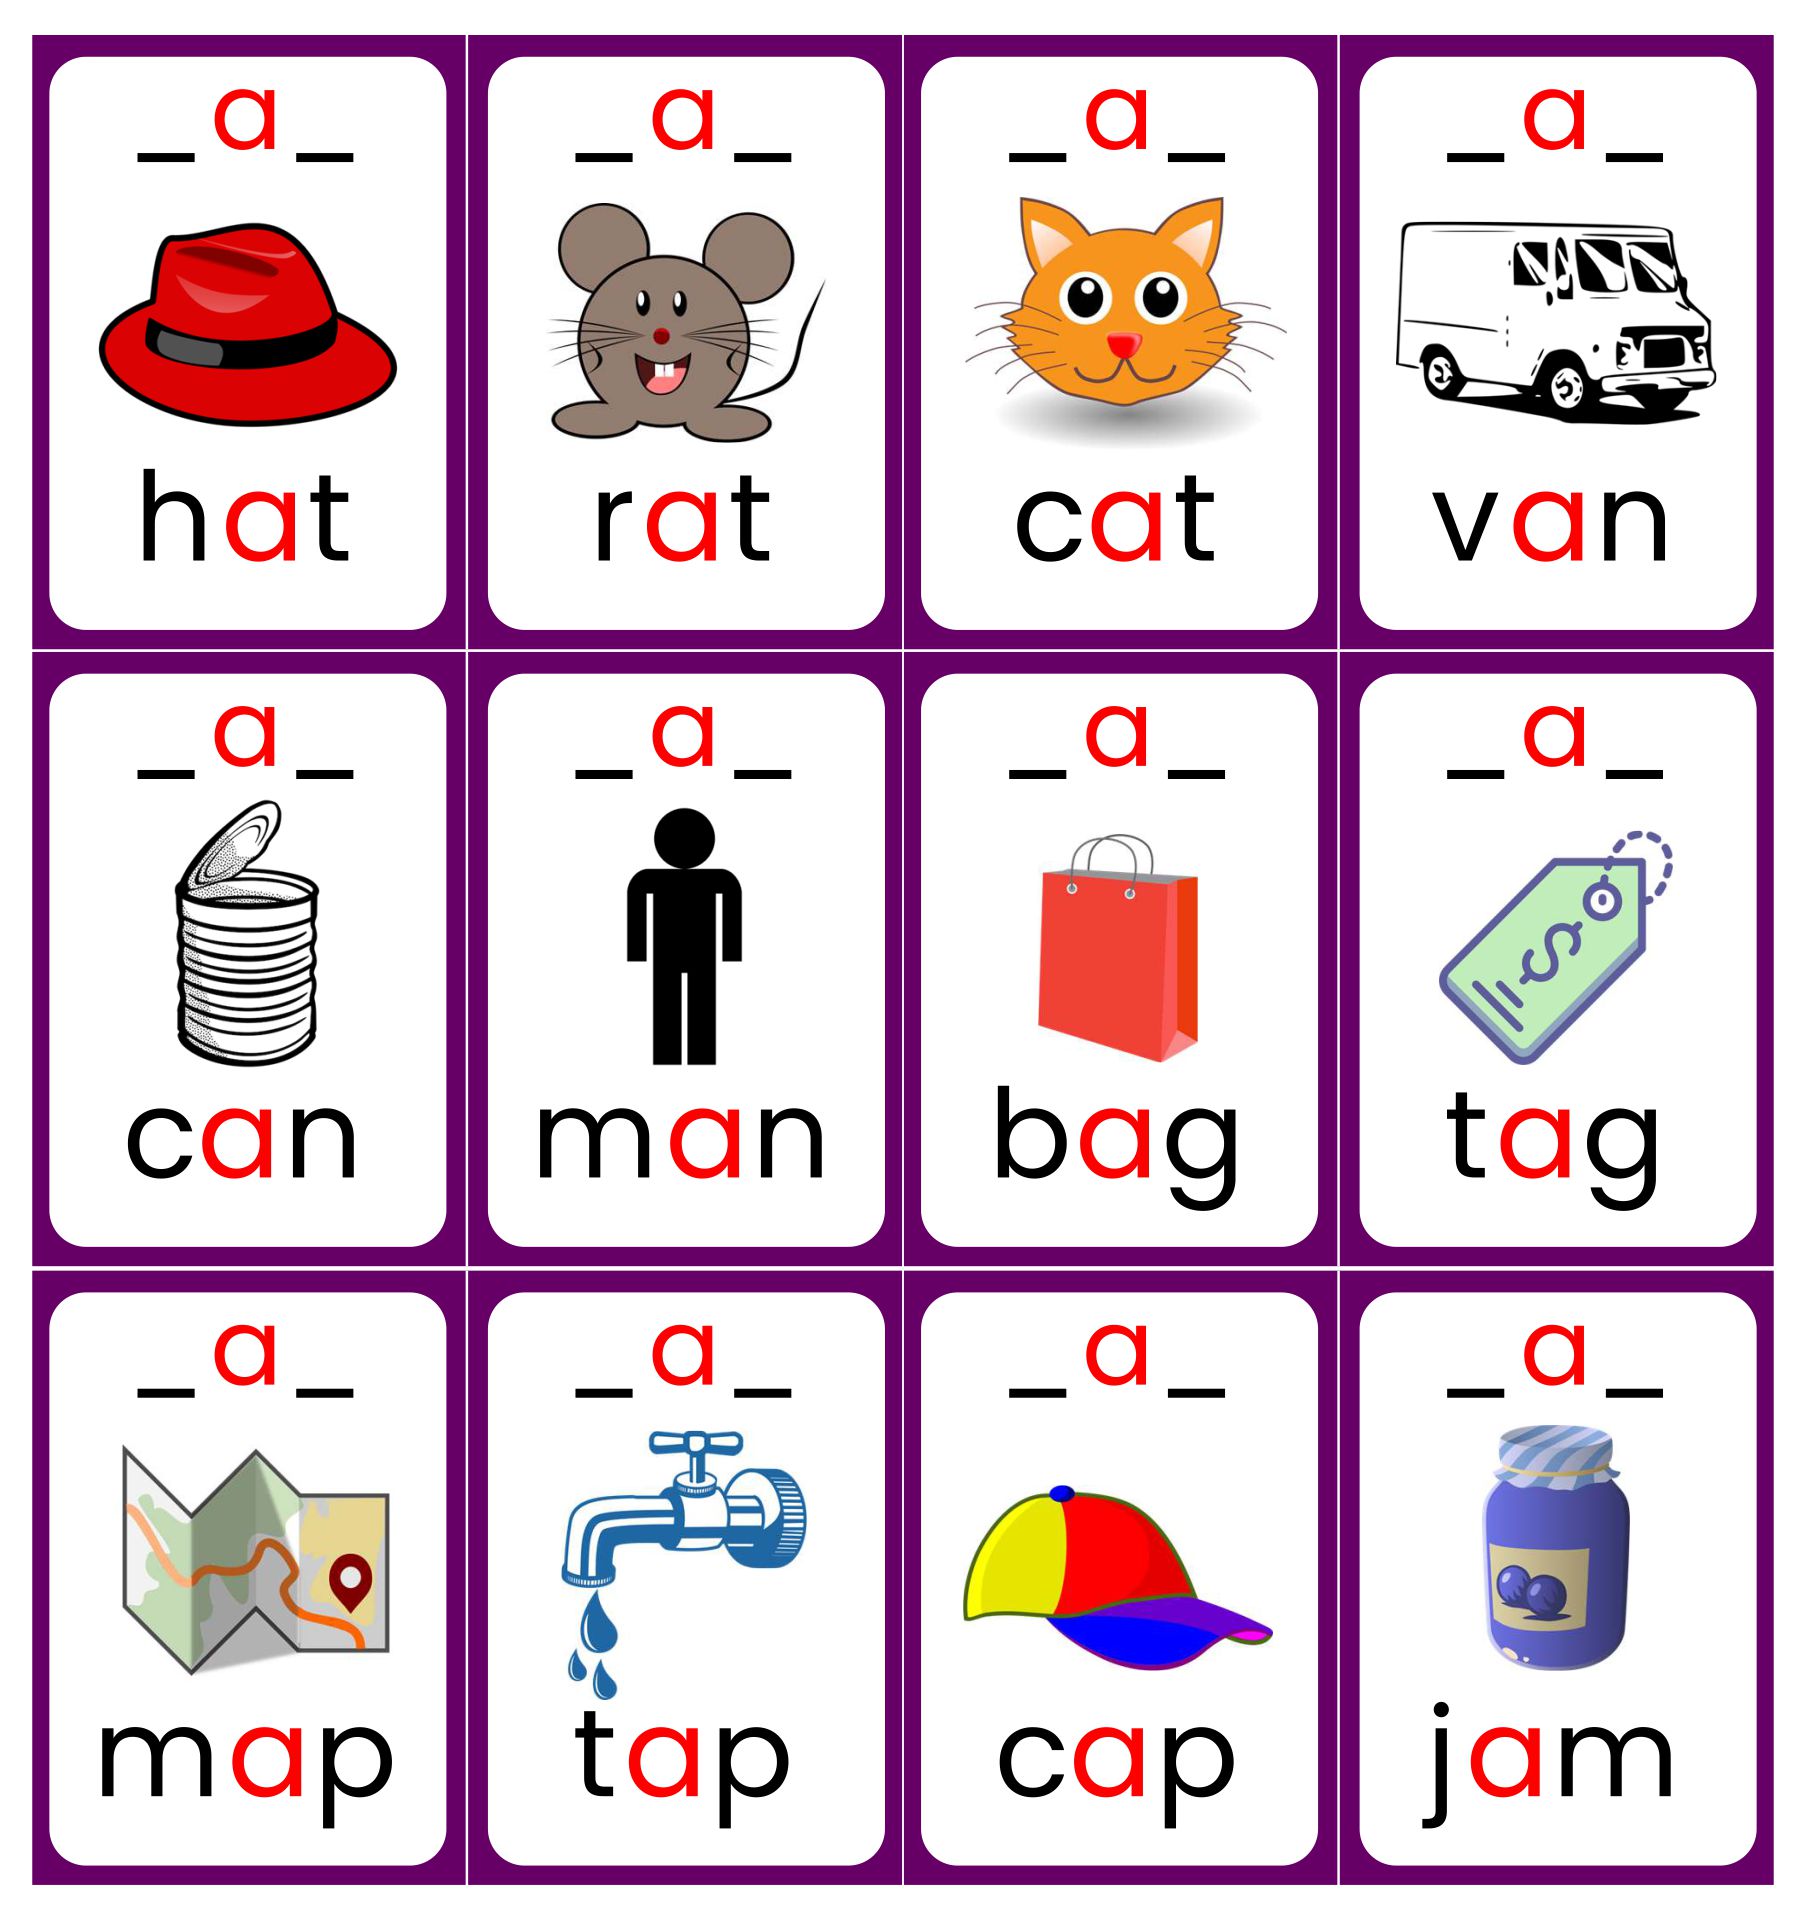 alphabet-flash-cards-printable-05-06-2013-there-are-some-ways-to-use-alphabet-flash-cards-to